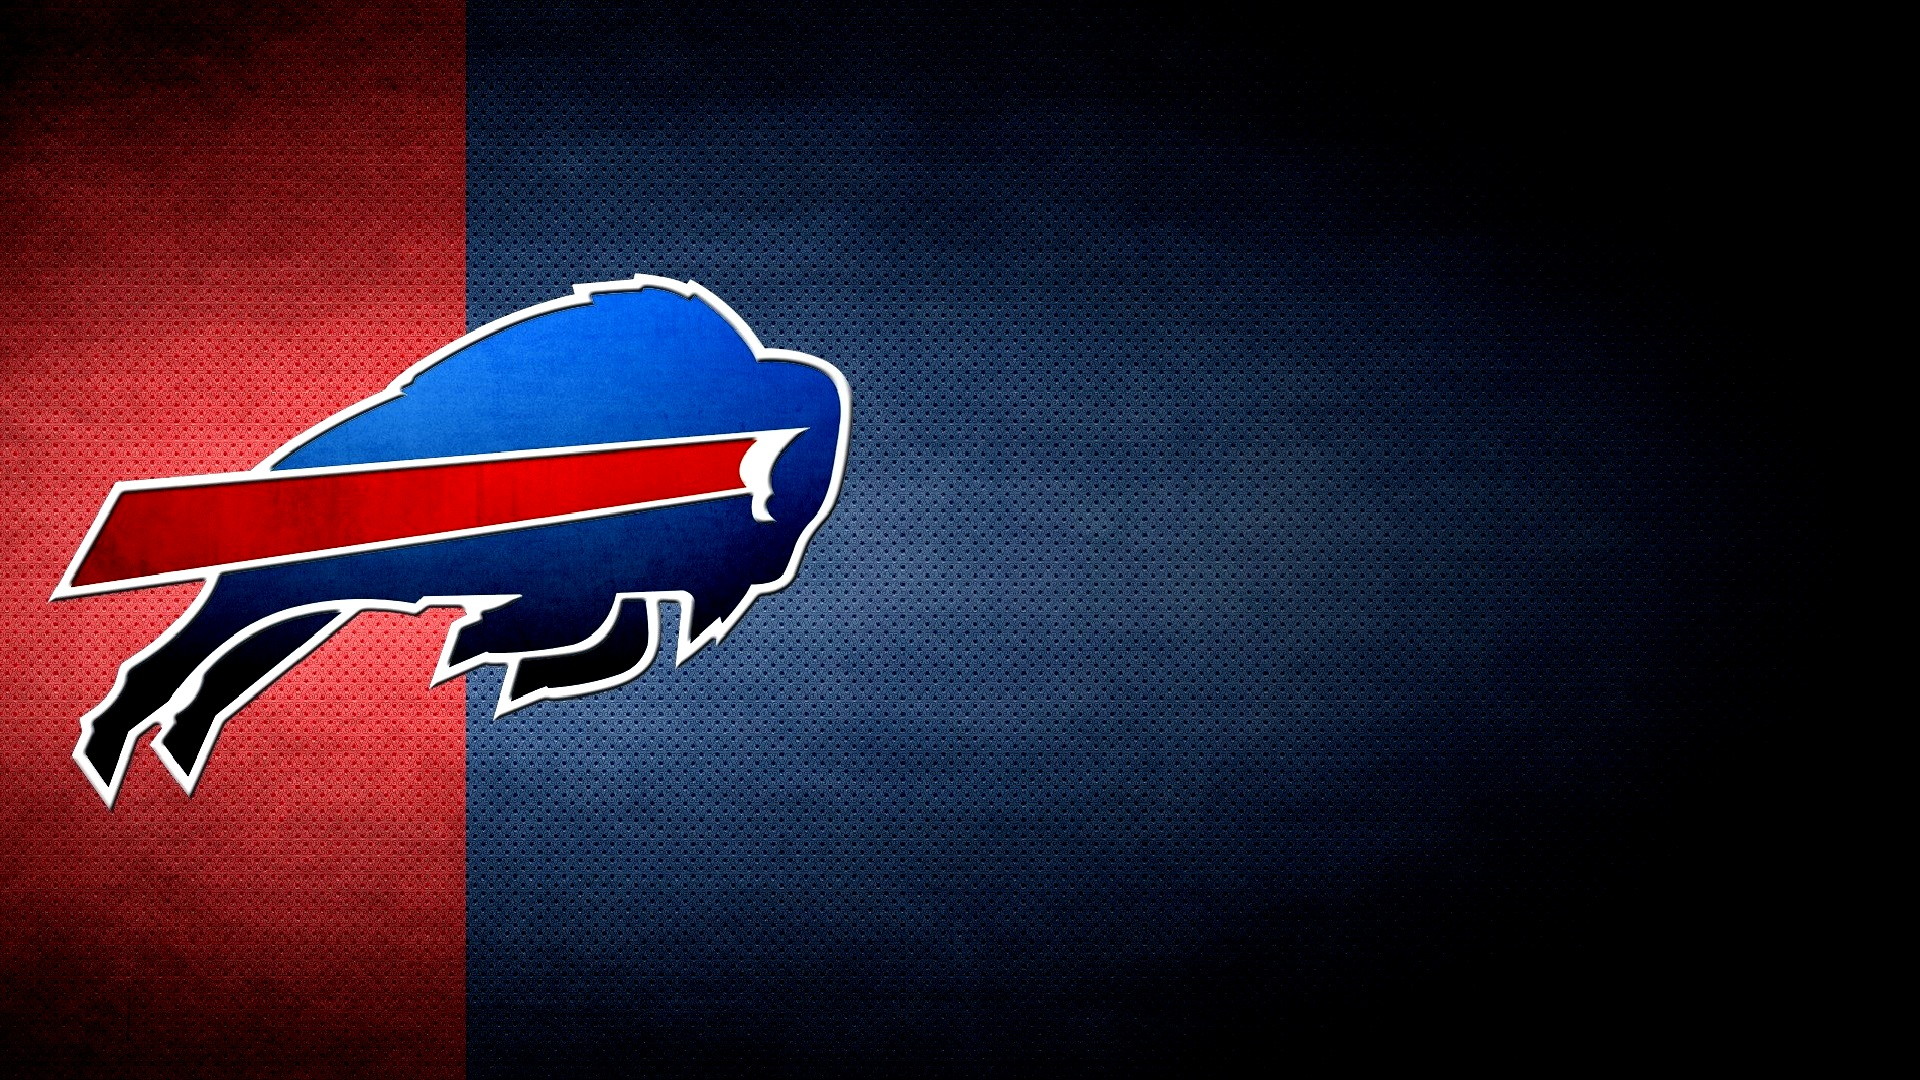 Buffalo Bills Wallpaper For Desktop with high-resolution 1920x1080 pixel. You can use and set as wallpaper for Notebook Screensavers, Mac Wallpapers, Mobile Home Screen, iPhone or Android Phones Lock Screen